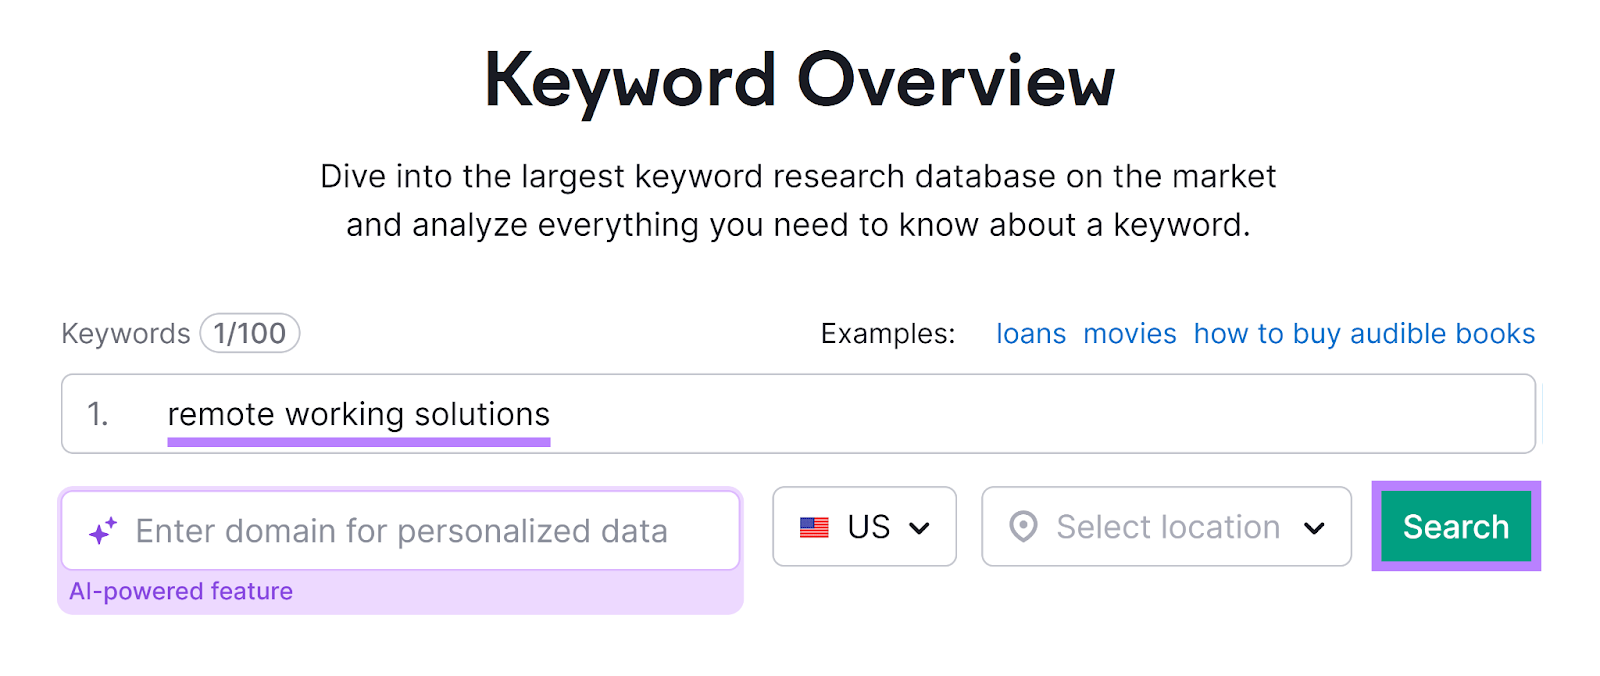 Keyword Overview tool start with keyword entered and Search button highlighted.